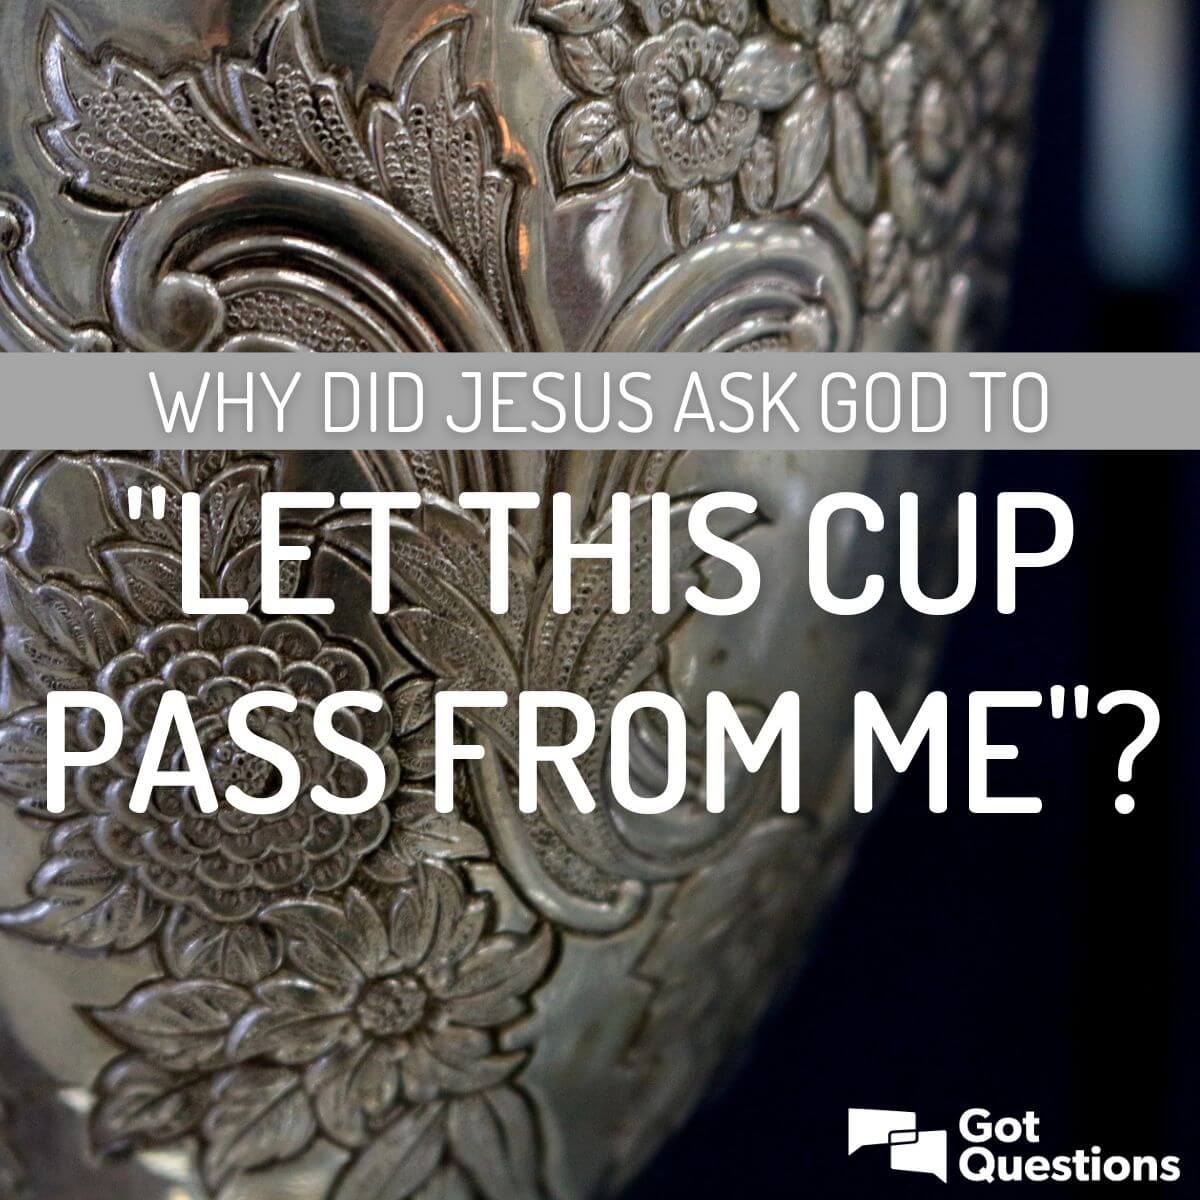 What Is the Cup That Jesus Wants His Father to Take Away?